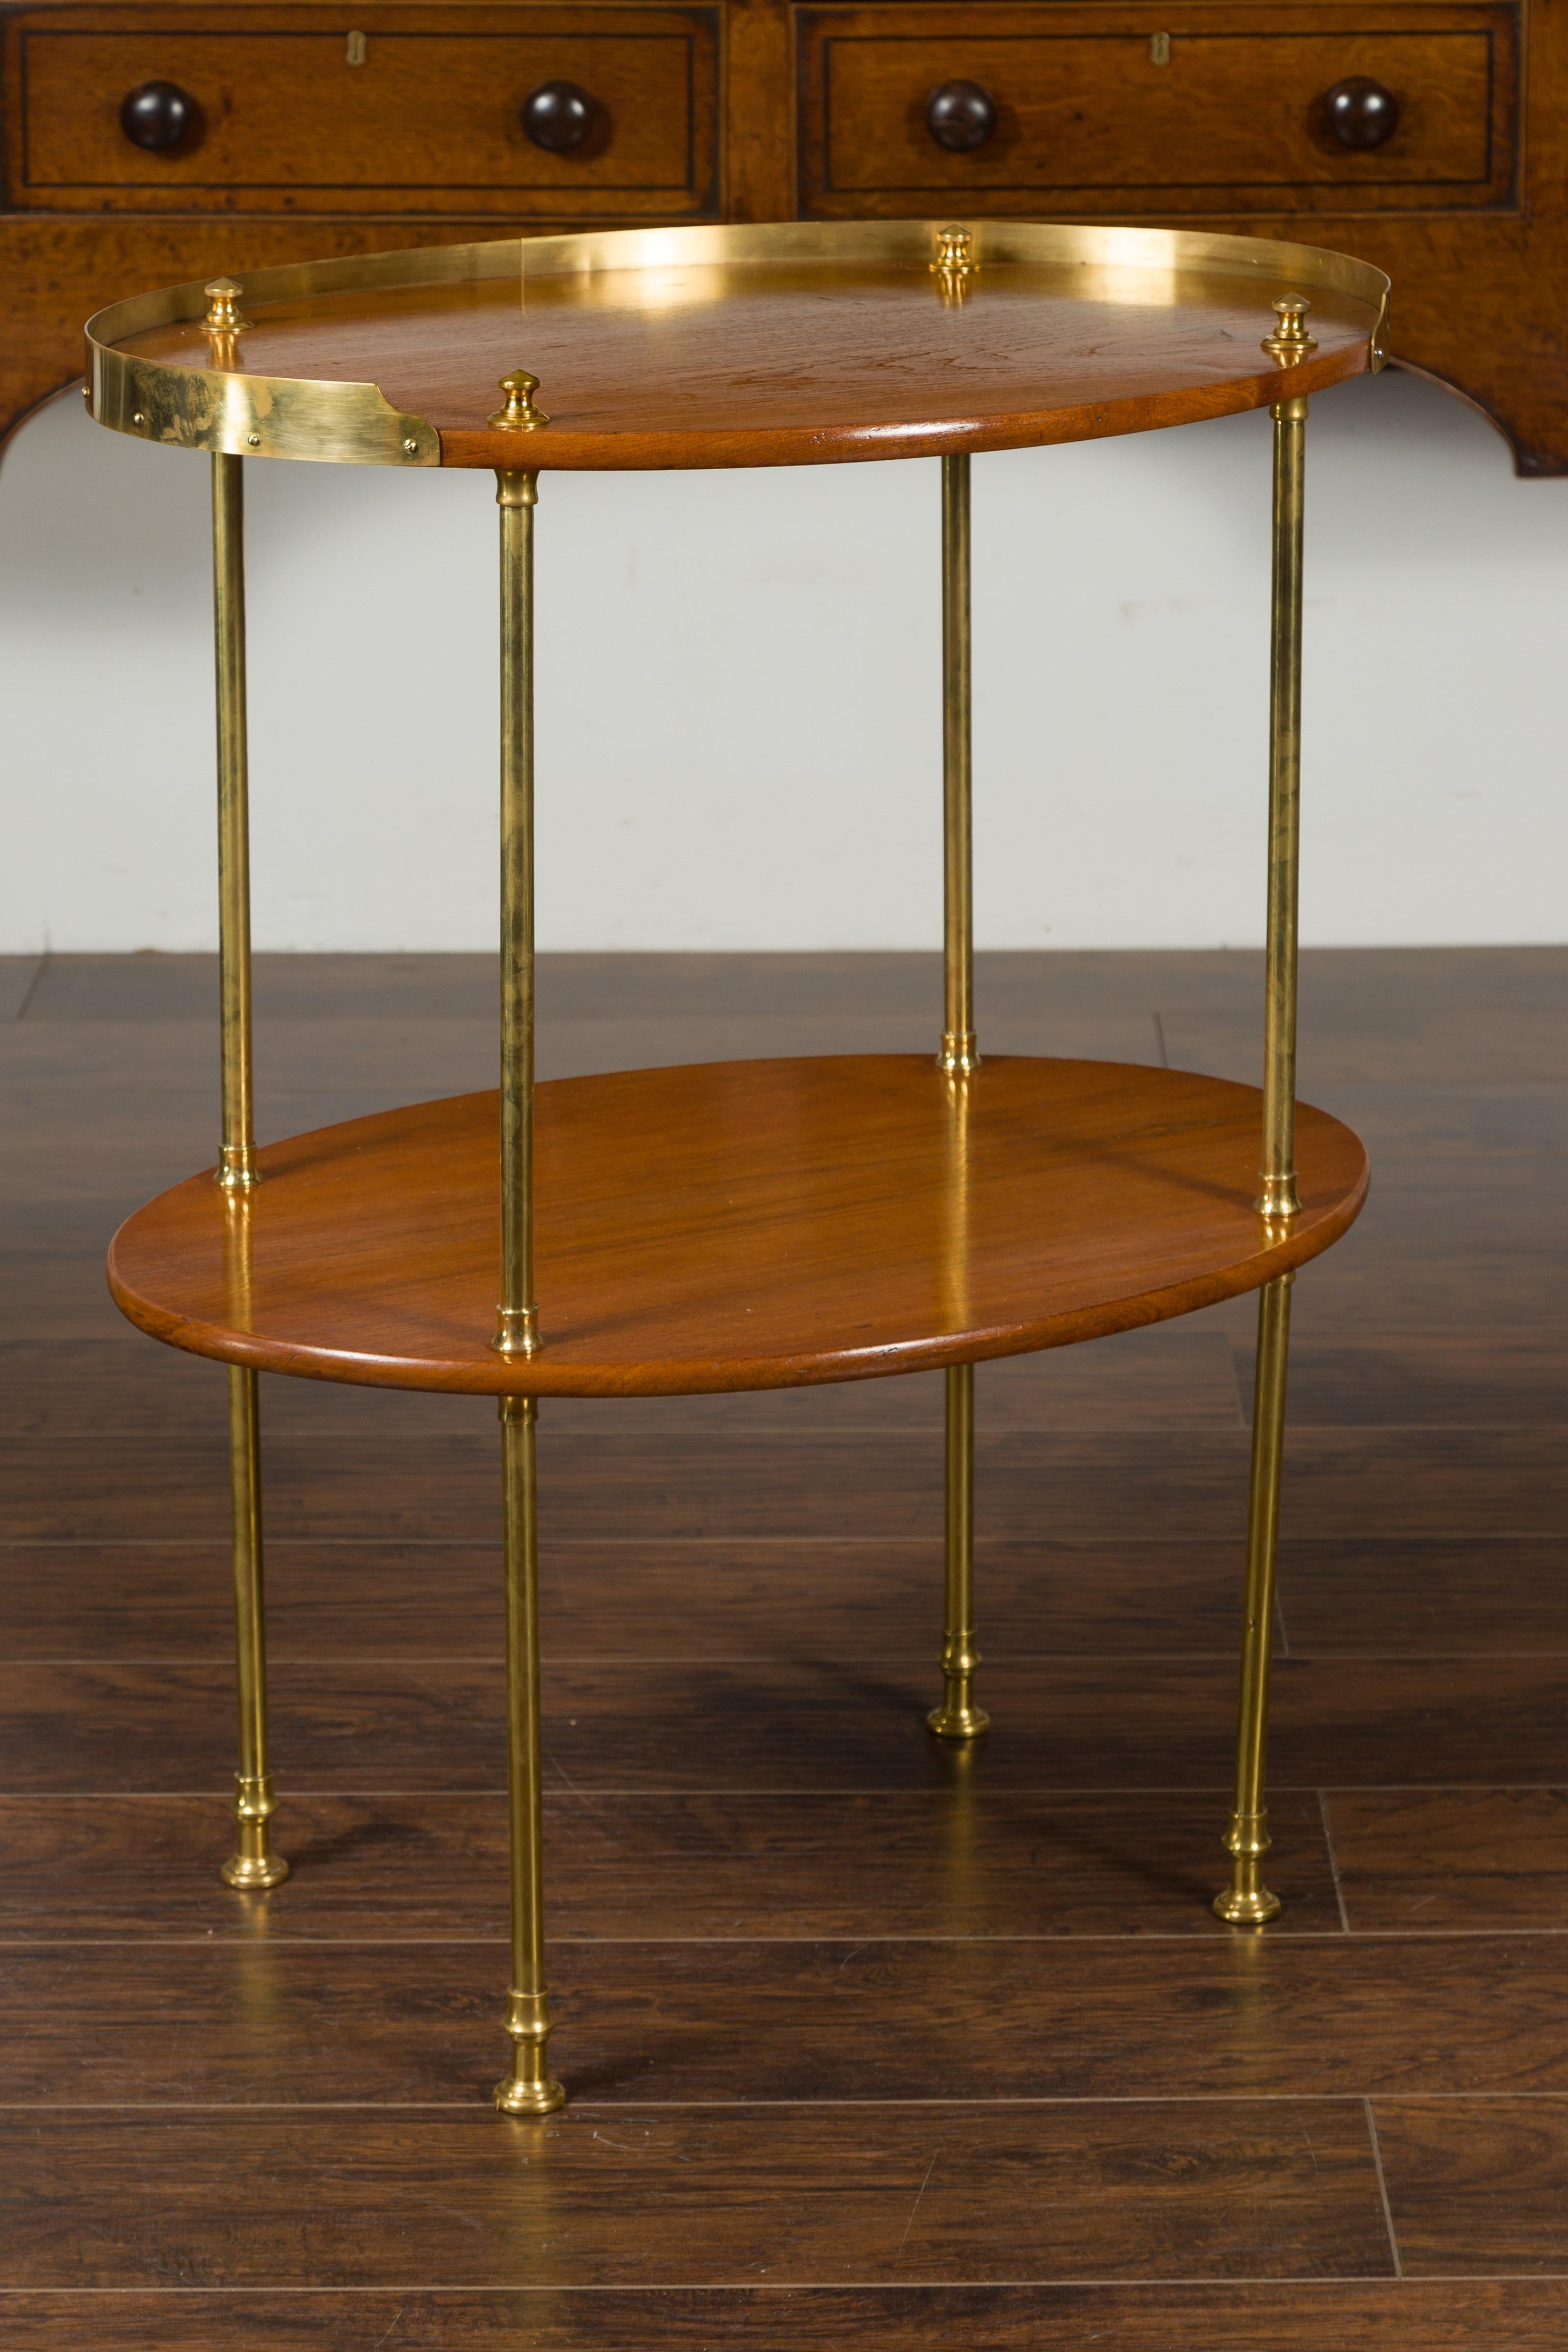 English Midcentury Mahogany Oval Two-Tiered Table with Brass Accents For Sale 4